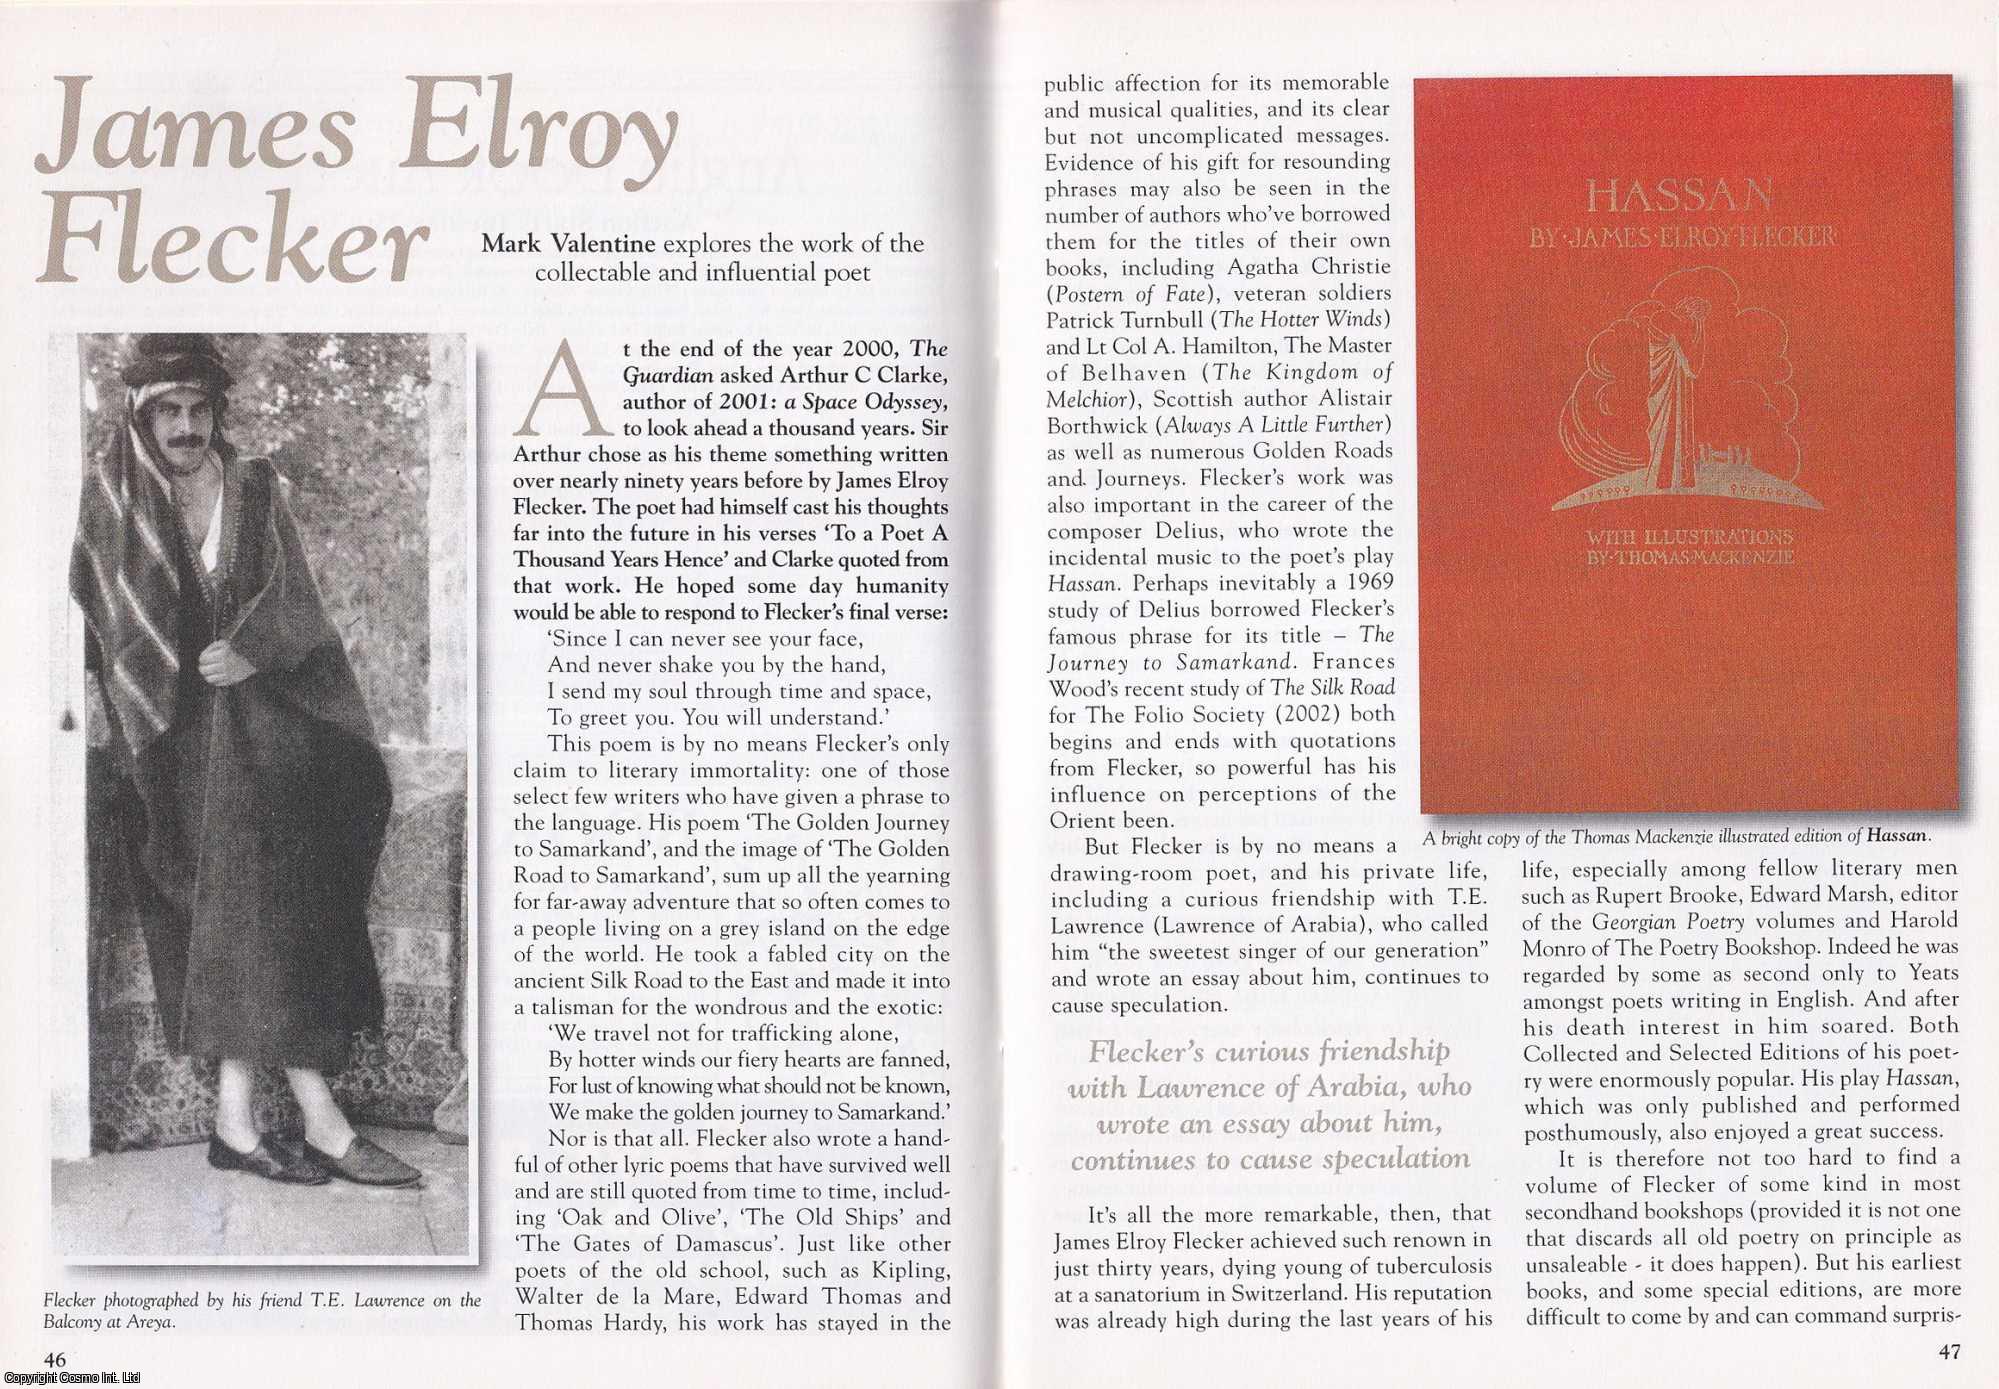 Mark Valentine - James Elroy Flecker. Exploring The Work of The Collectable and Influential Poet. This is an original article separated from an issue of The Book & Magazine Collector publication.